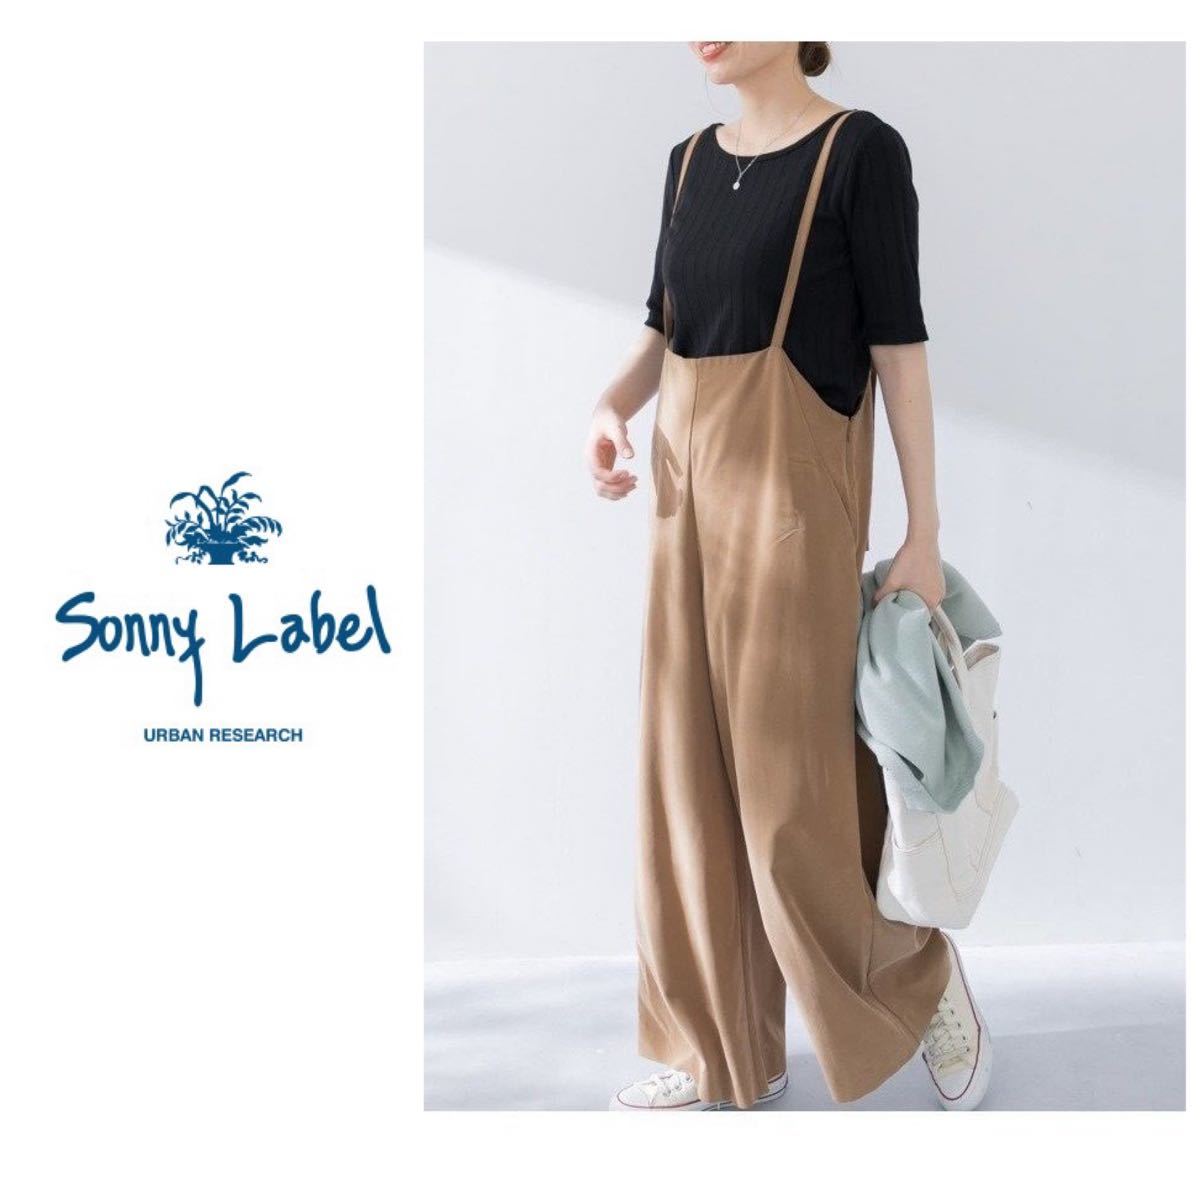 URBAN RESEARCH Sonny Label サス付きサロペット